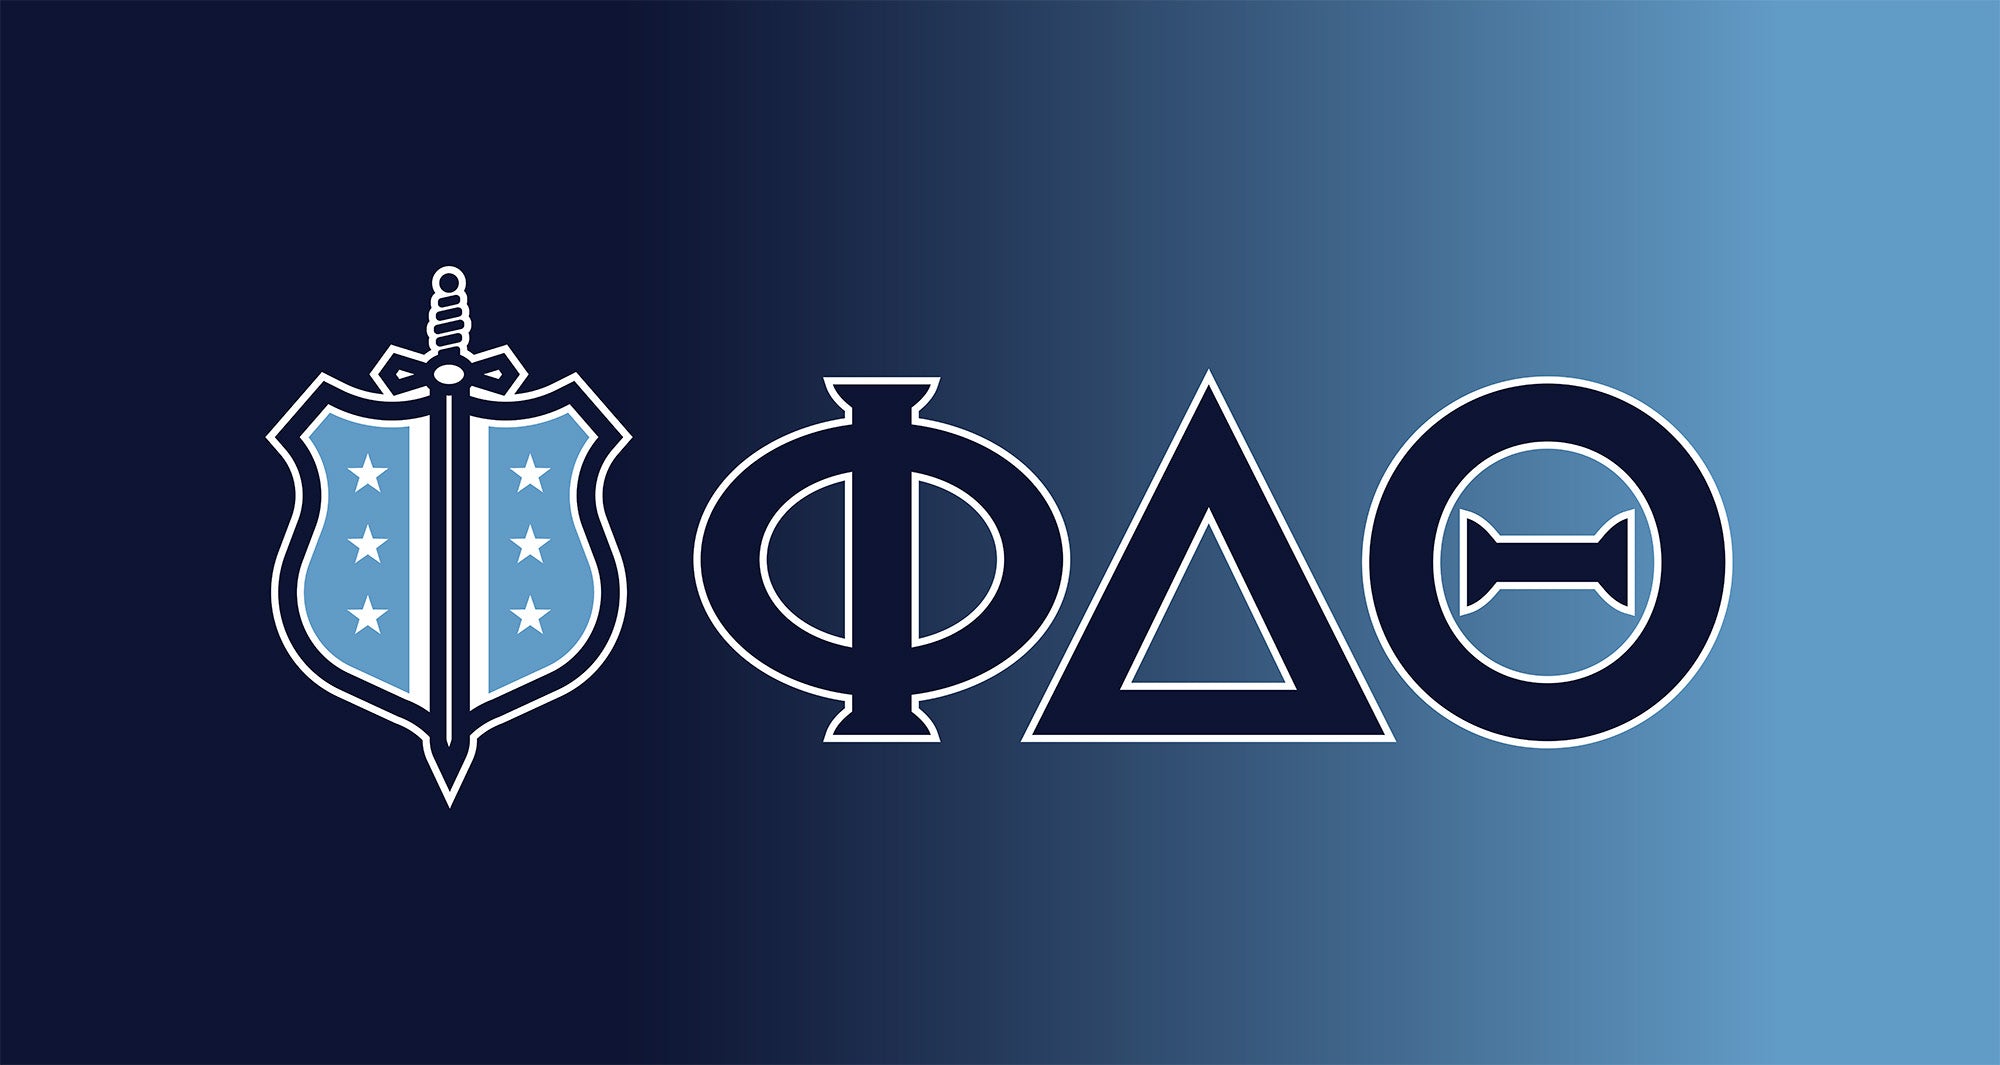 Phi Delta Theta banner image on gradient blue to black background. 